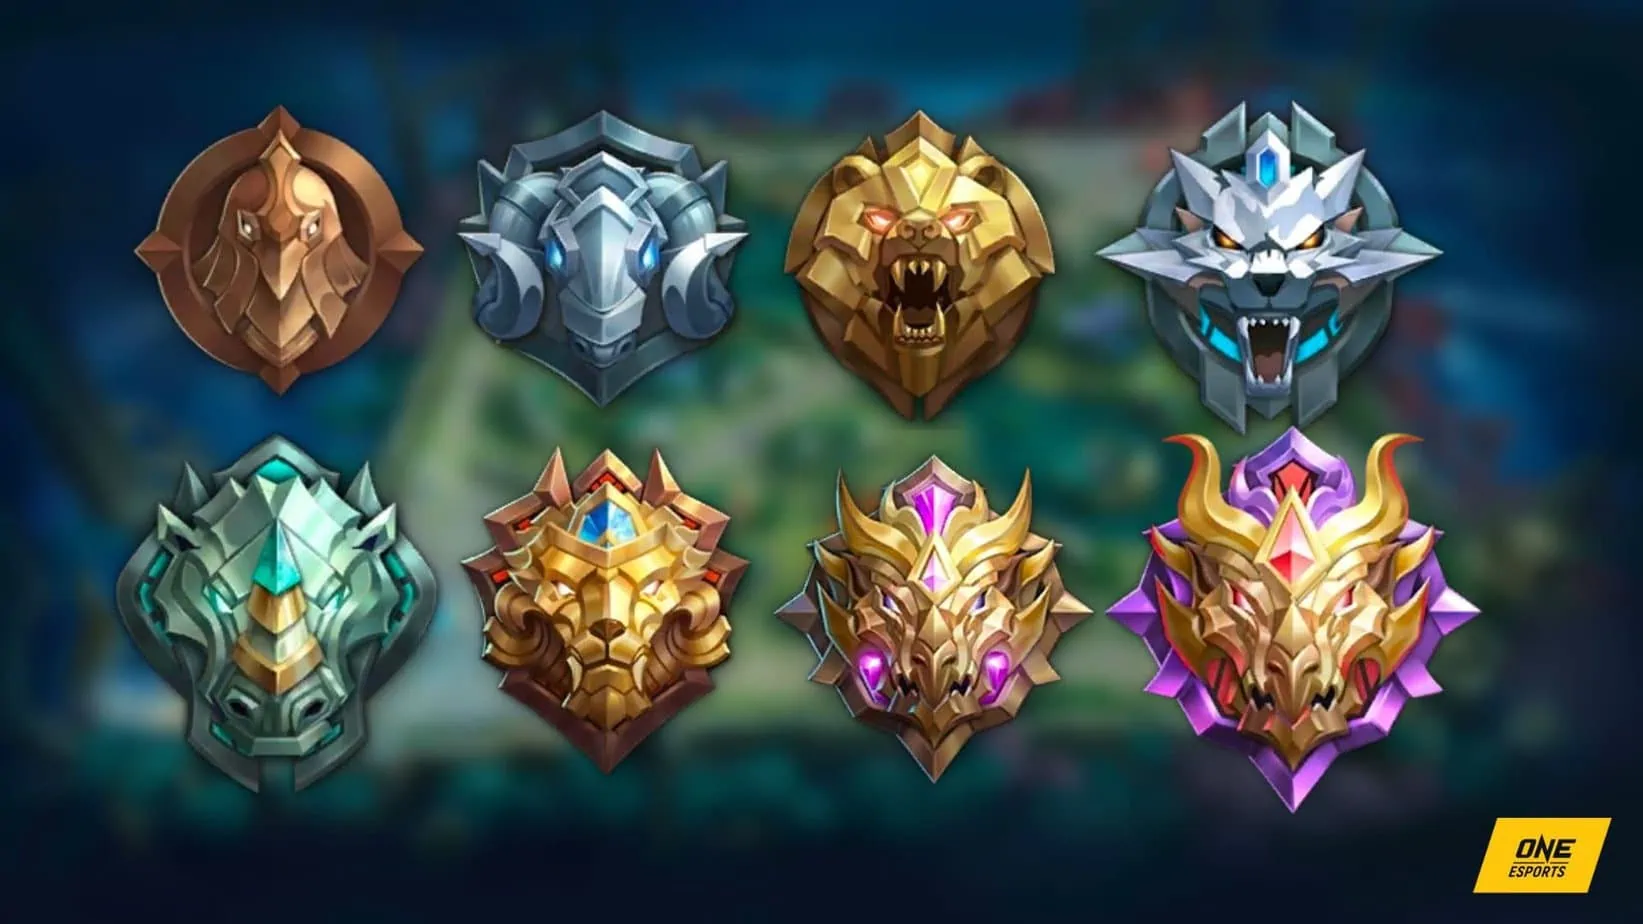 What are the different ranks in Mobile Legends? - Quora